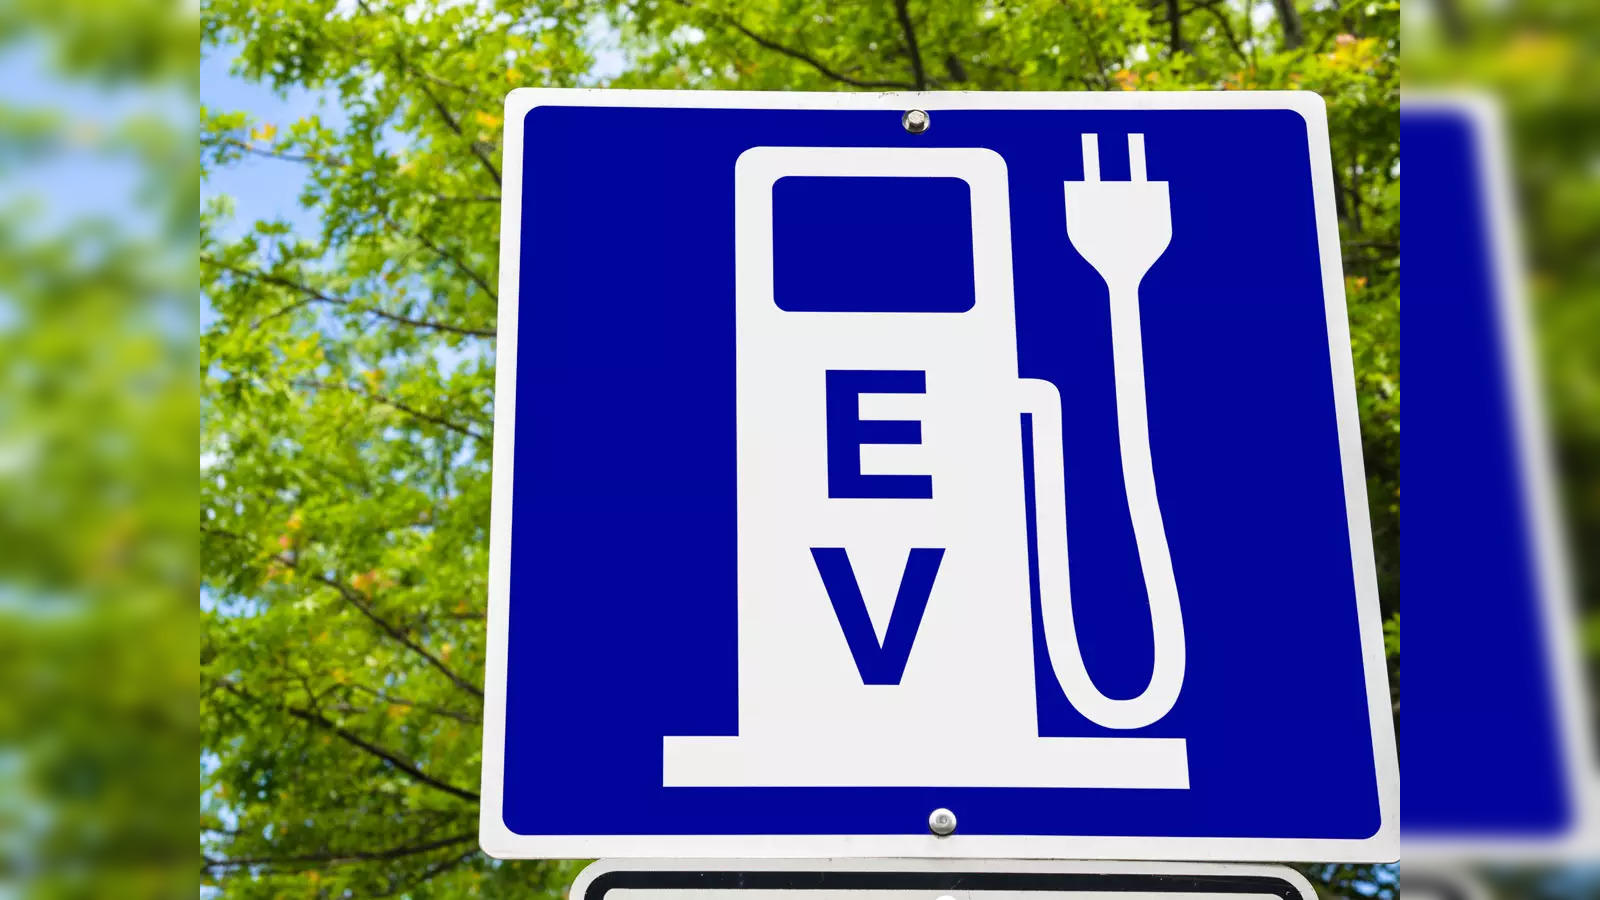 How Rs 34 trillion lithium find could shape India's EV story - The